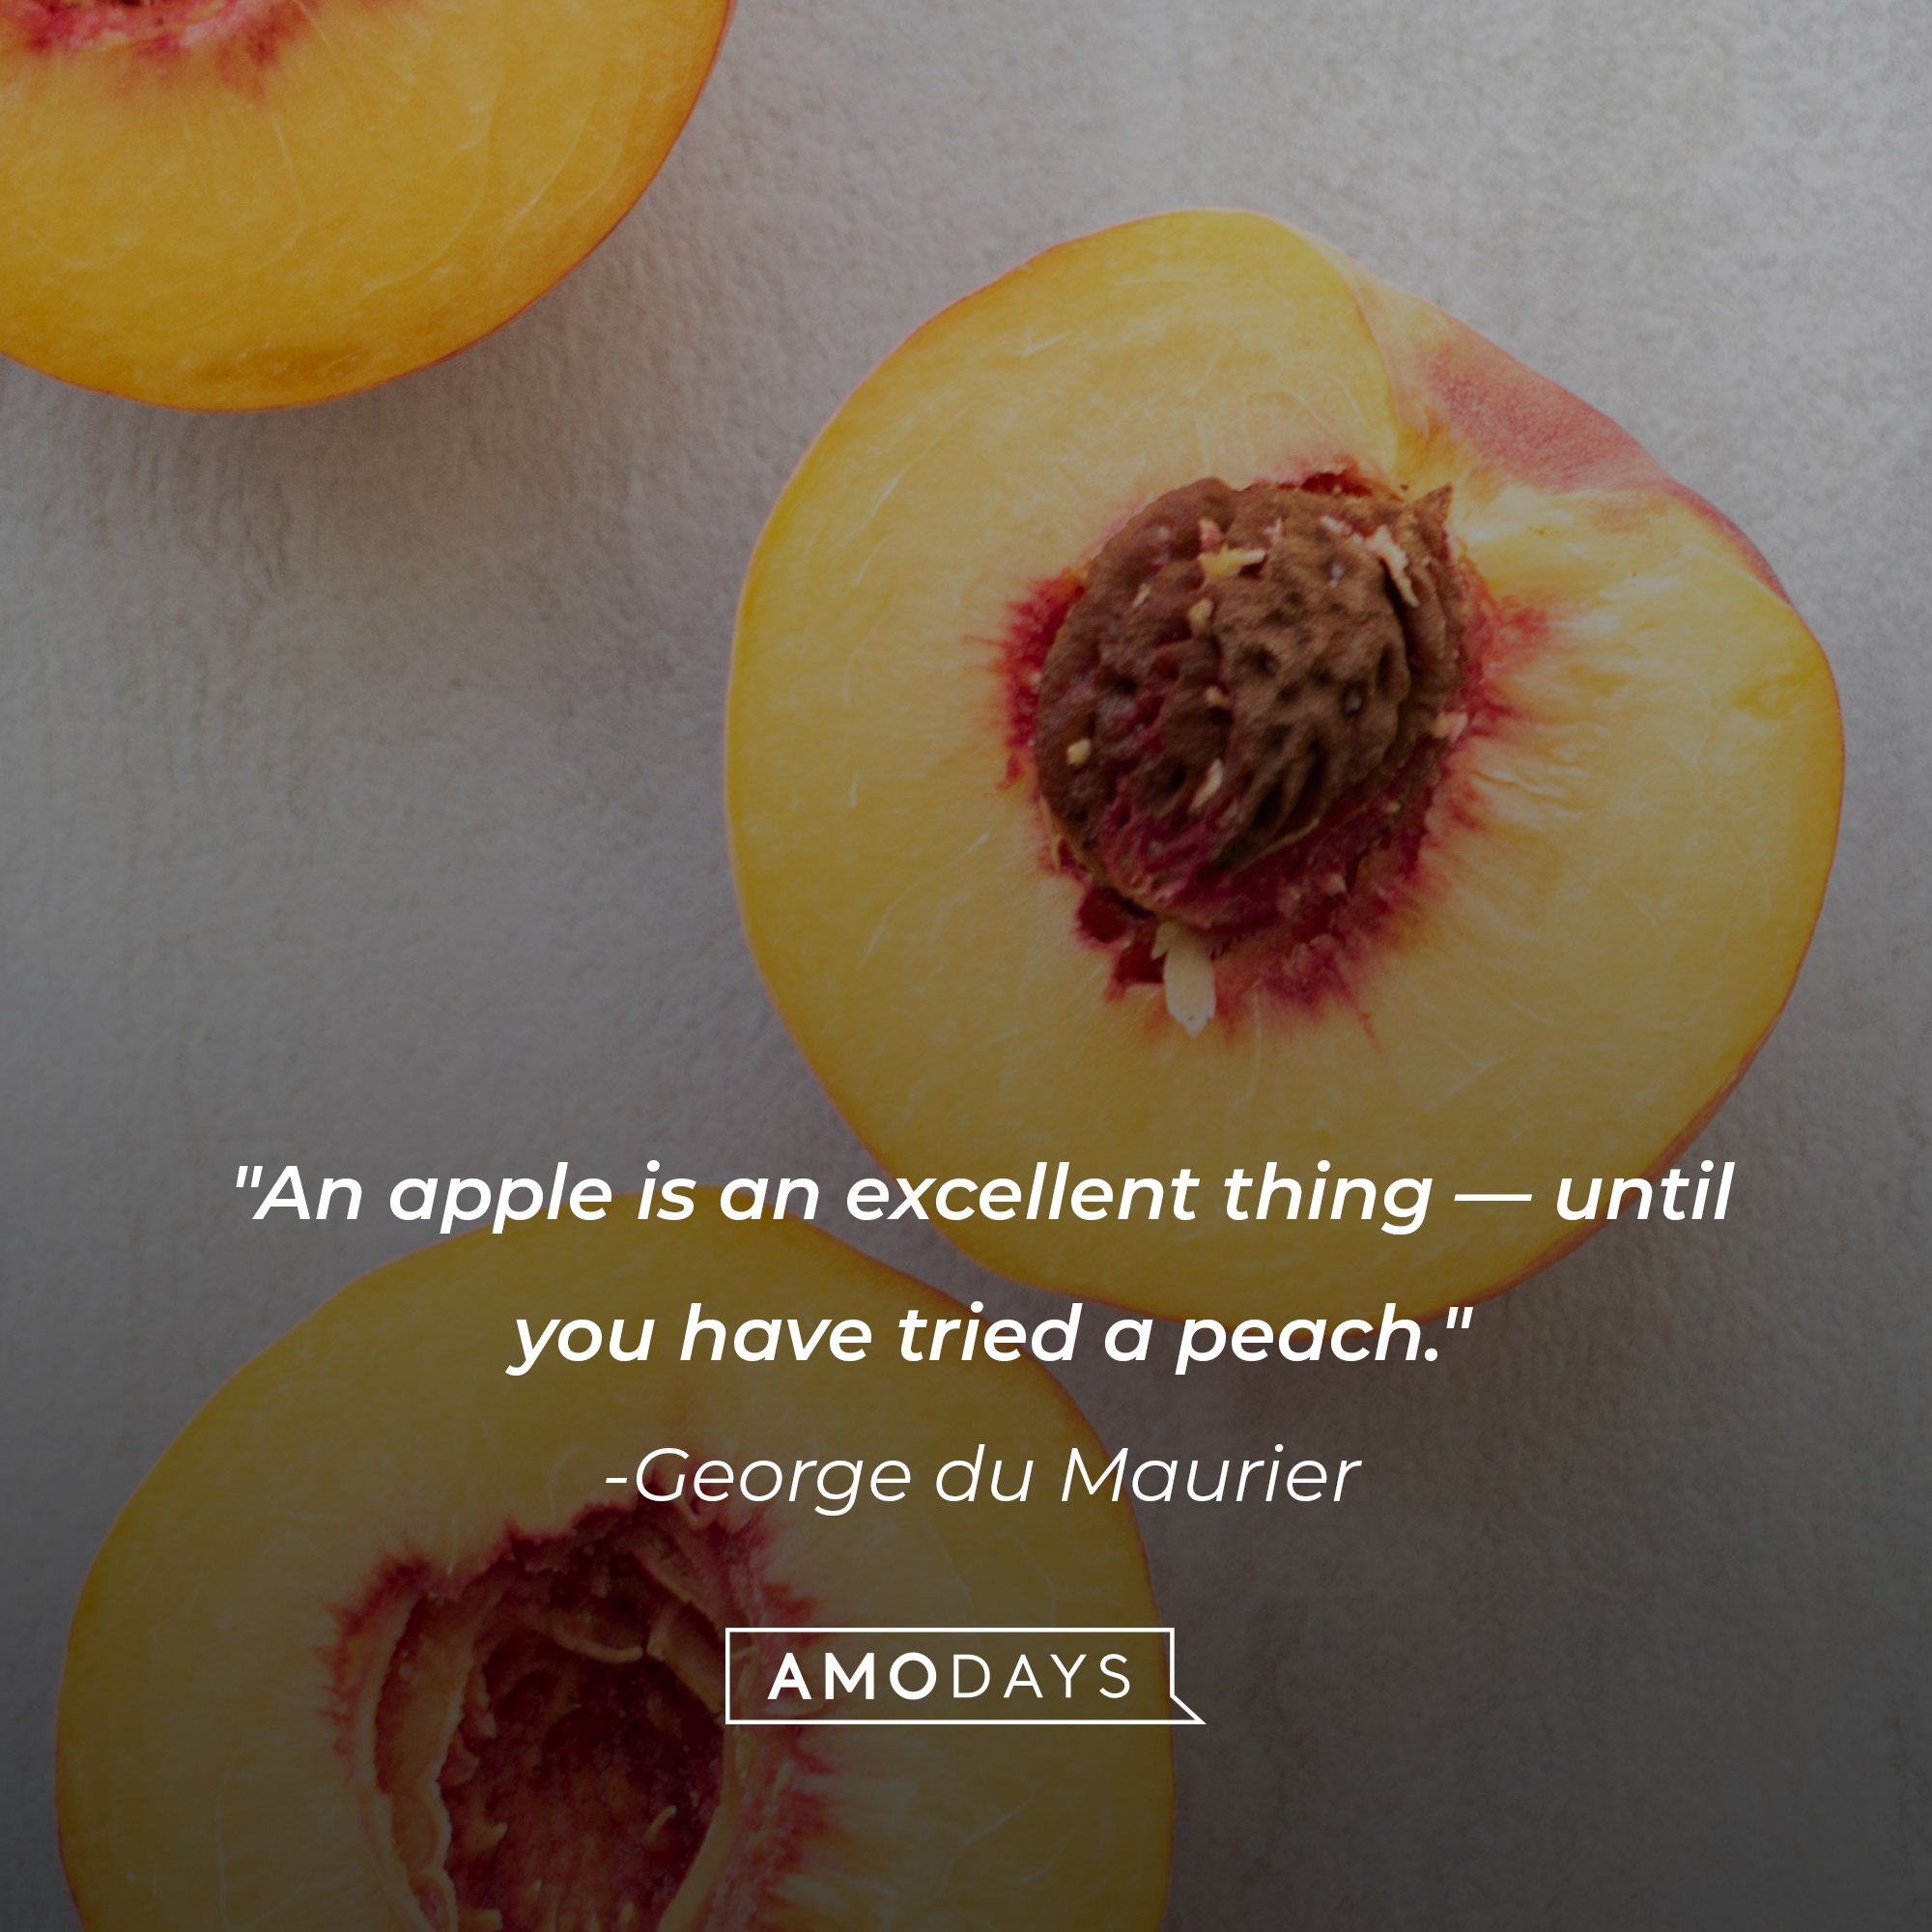 George du Maurier's quote: "An apple is an excellent thing — until you have tried a peach." | Image: AmoDays